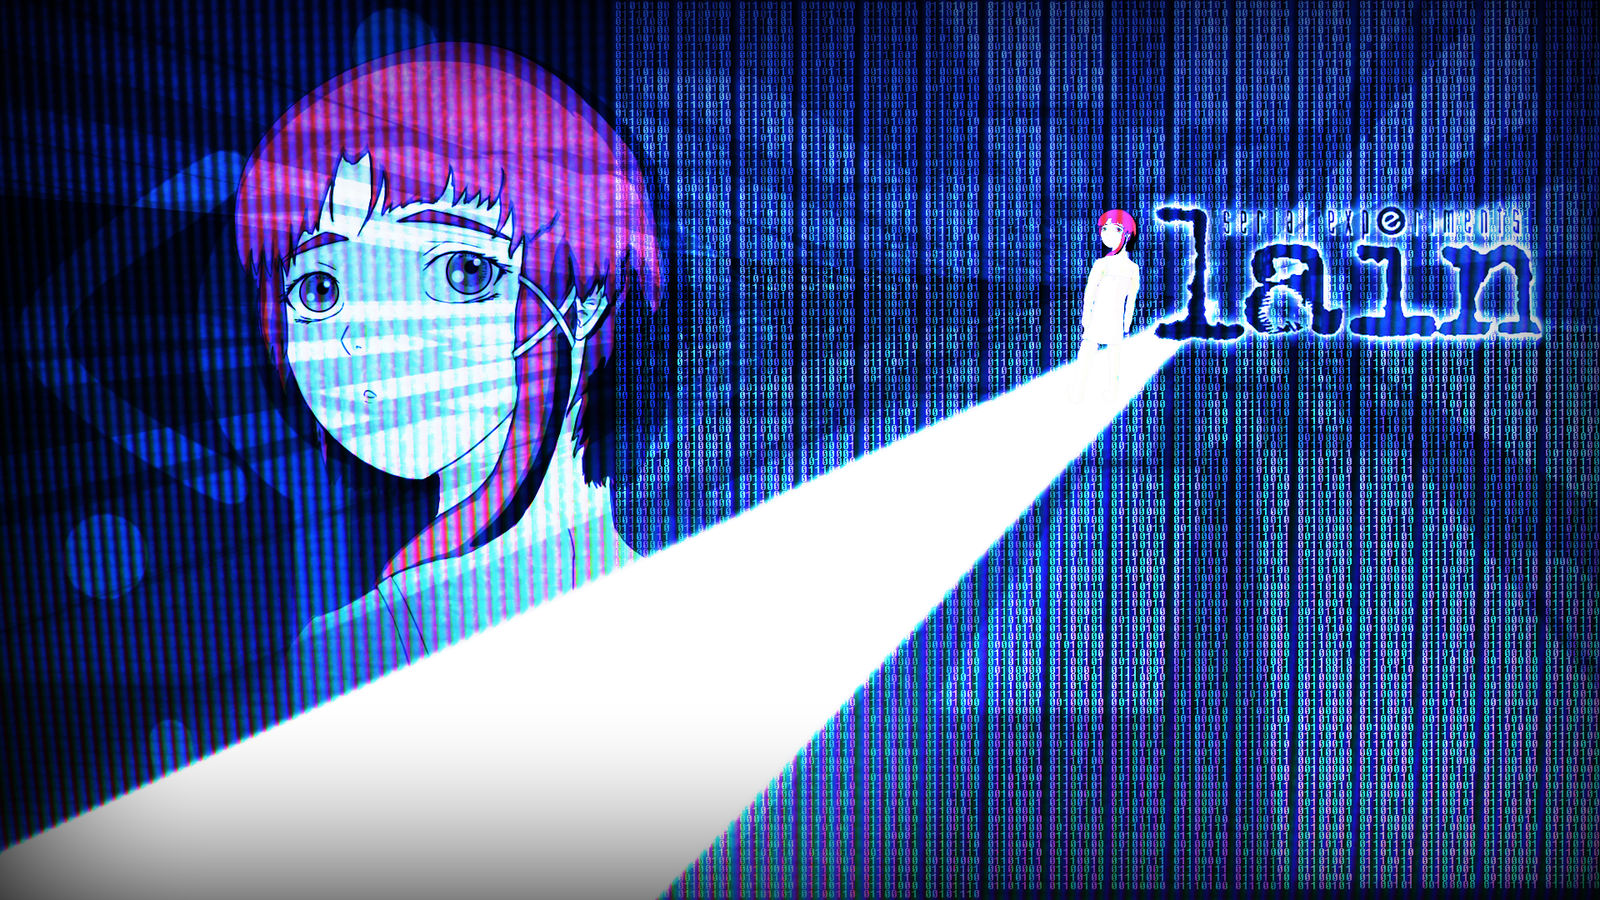 Serial Experiments Lain Wallpaper By Drstuff On Deviantart